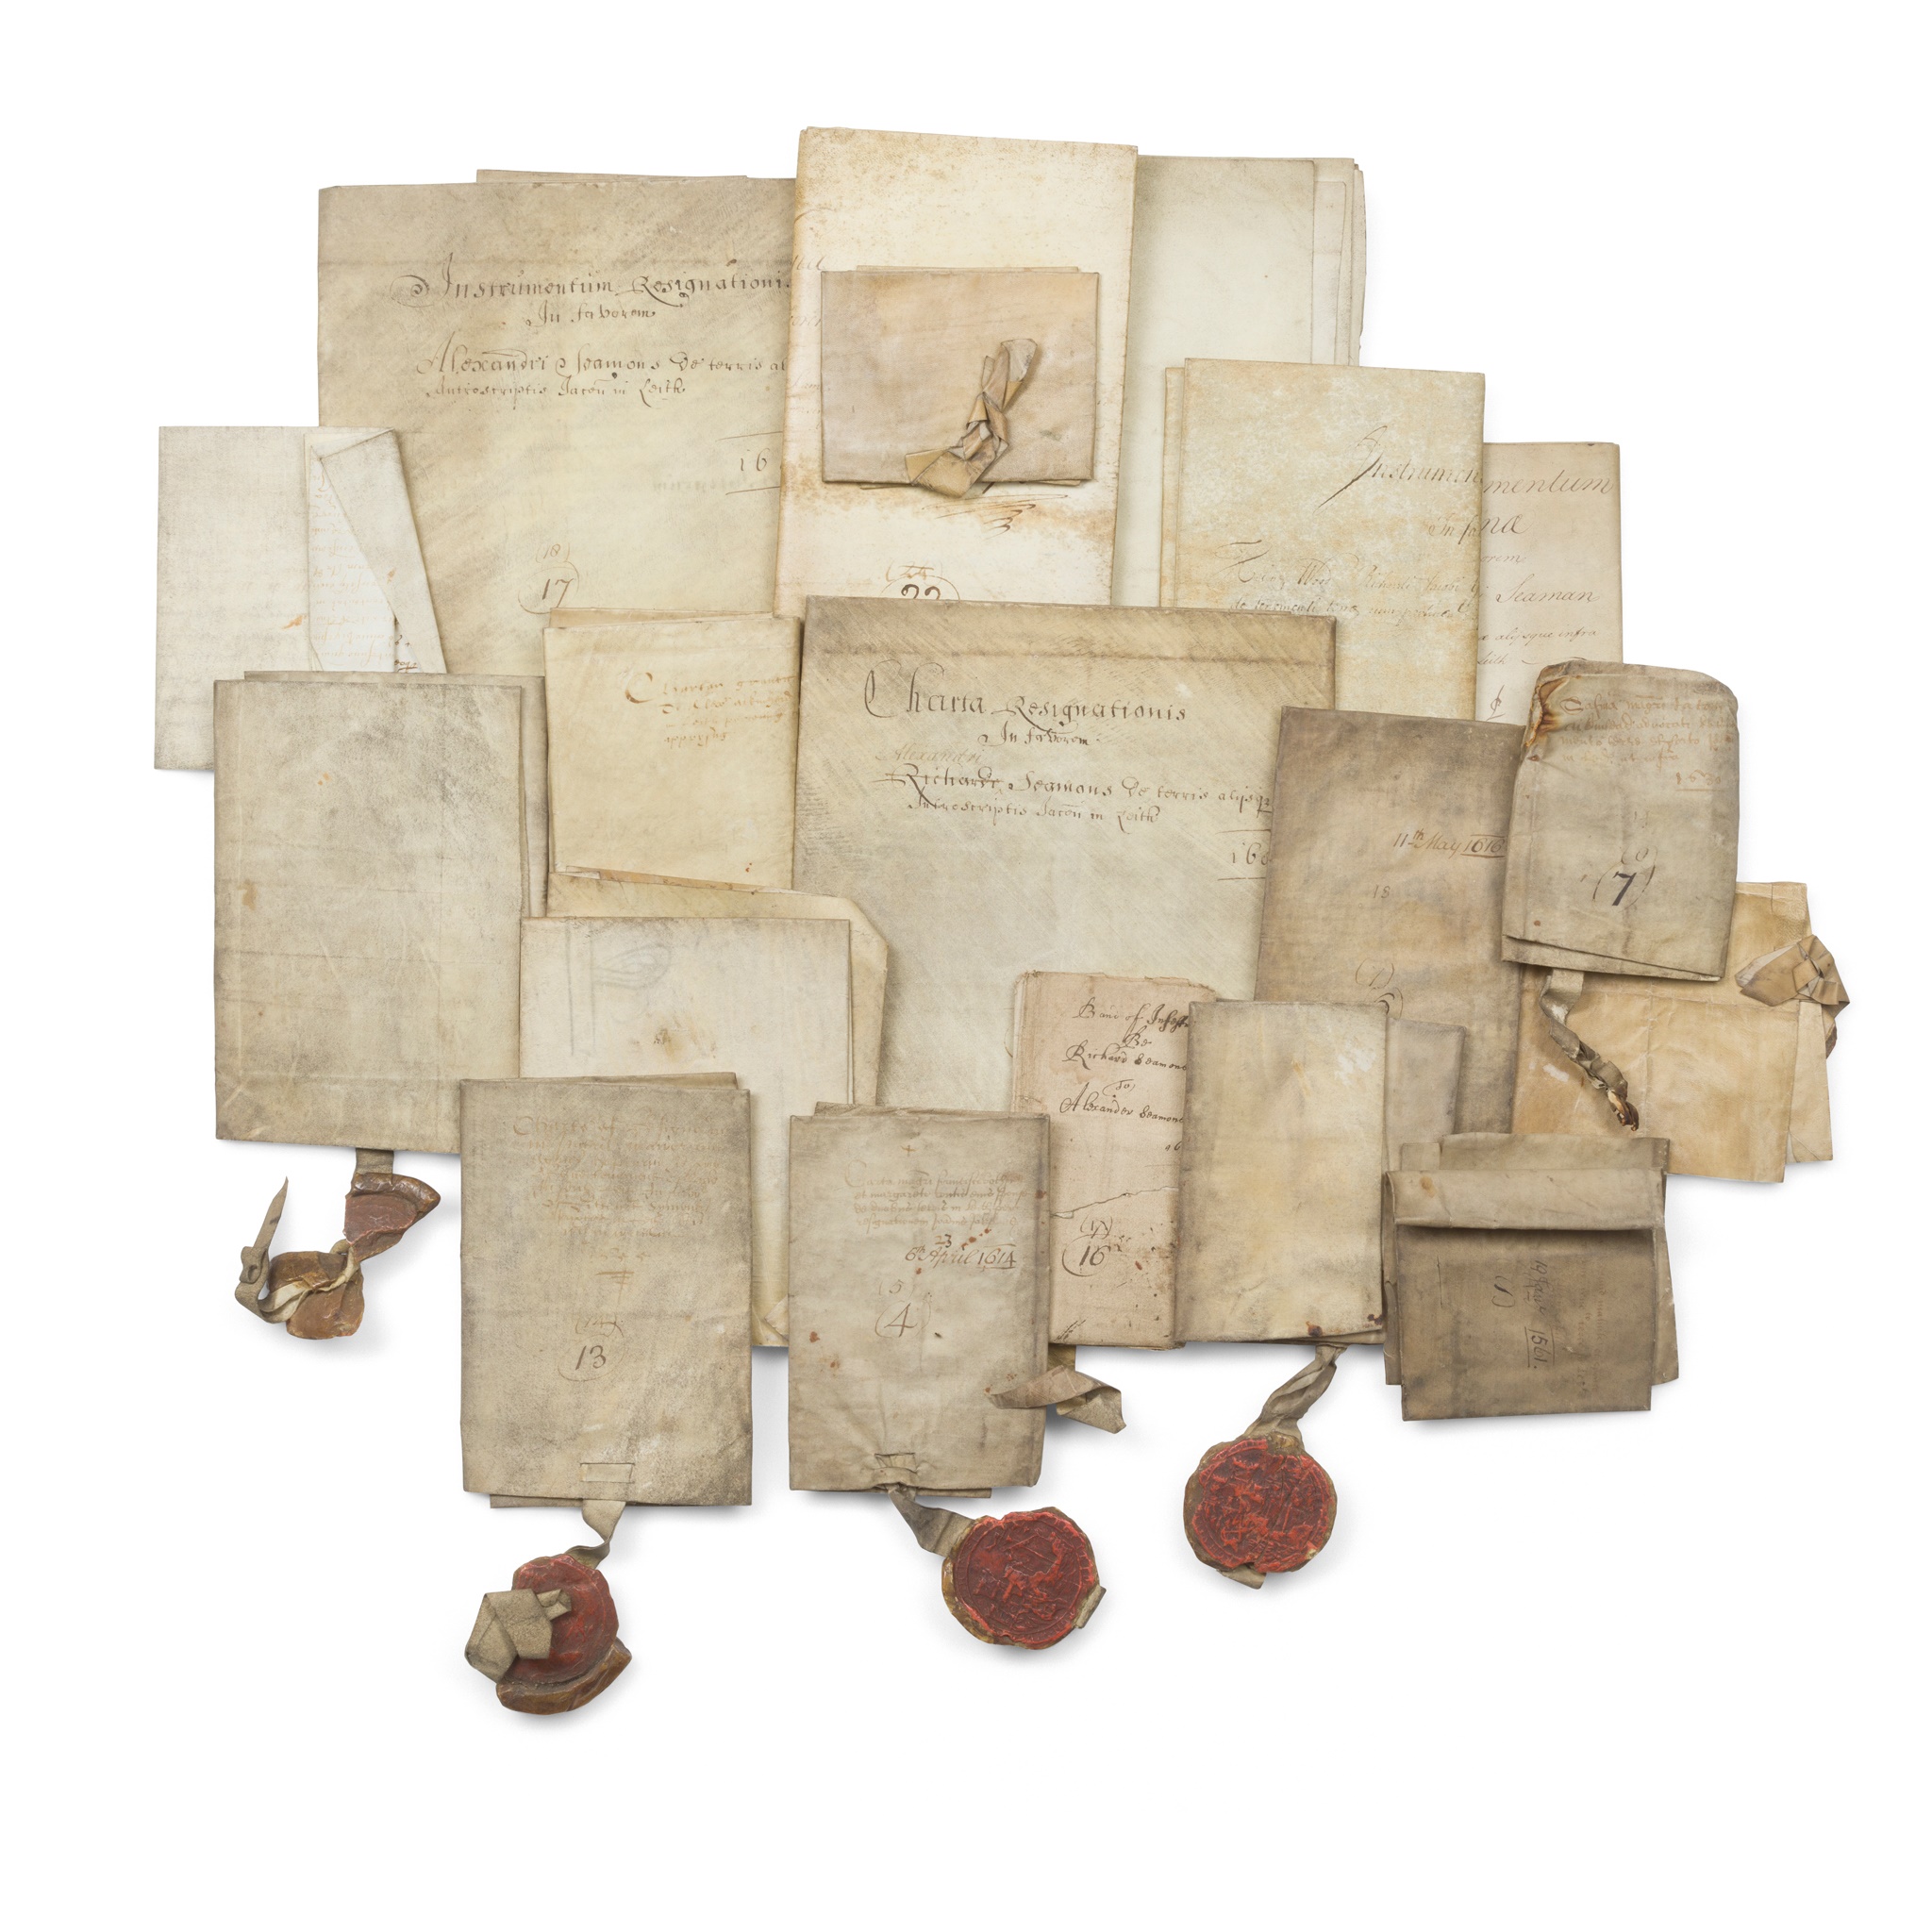 Leith - 18 indentures or similar legal agreements on vellum including